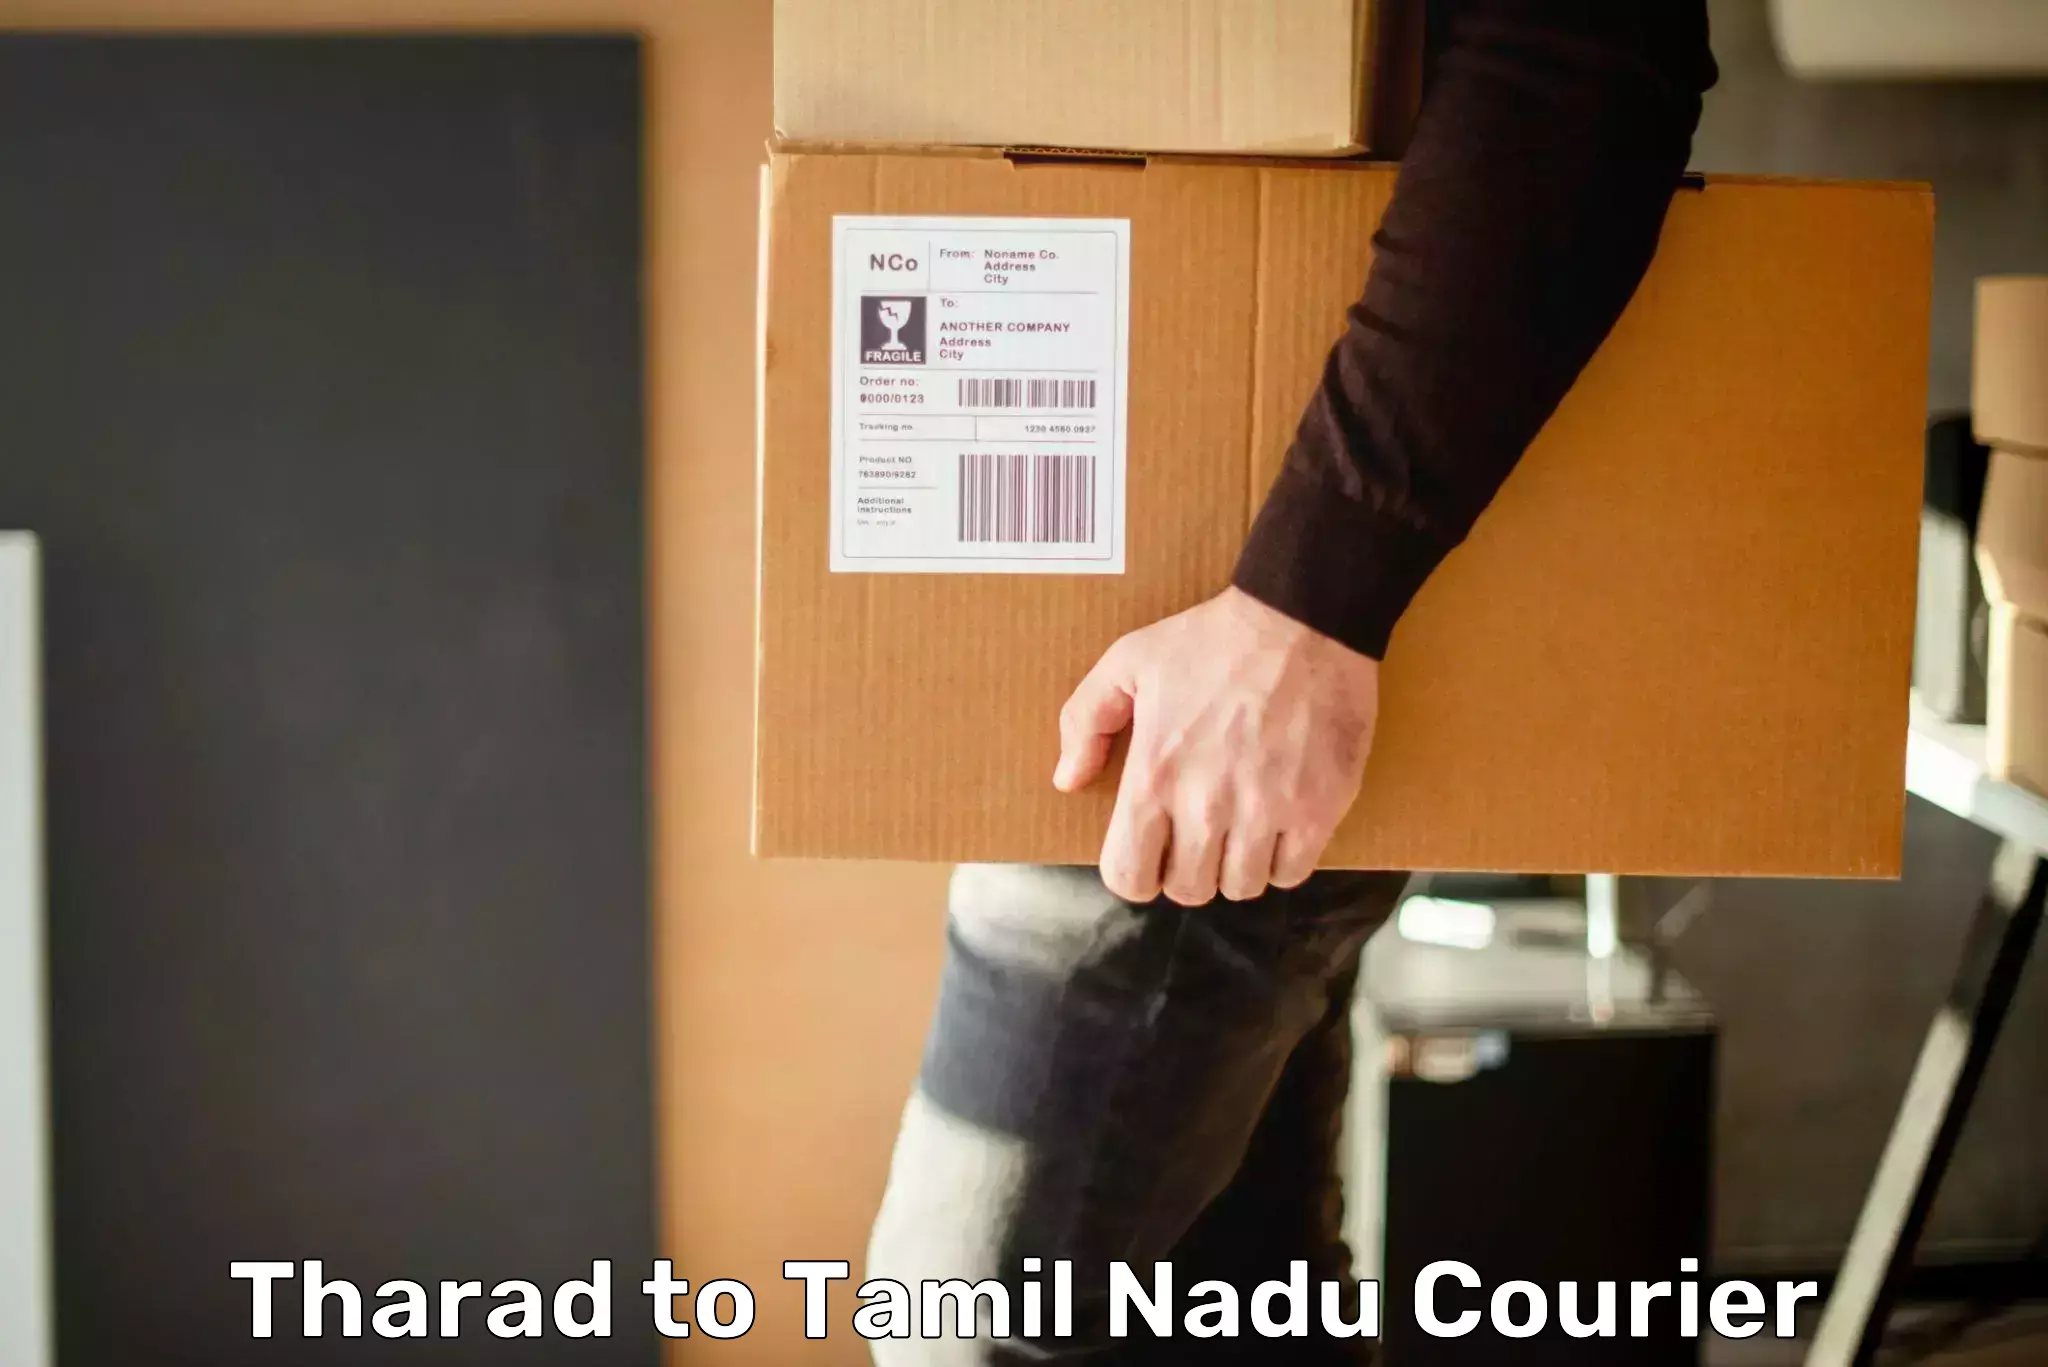 Courier service innovation in Tharad to Tiruchi